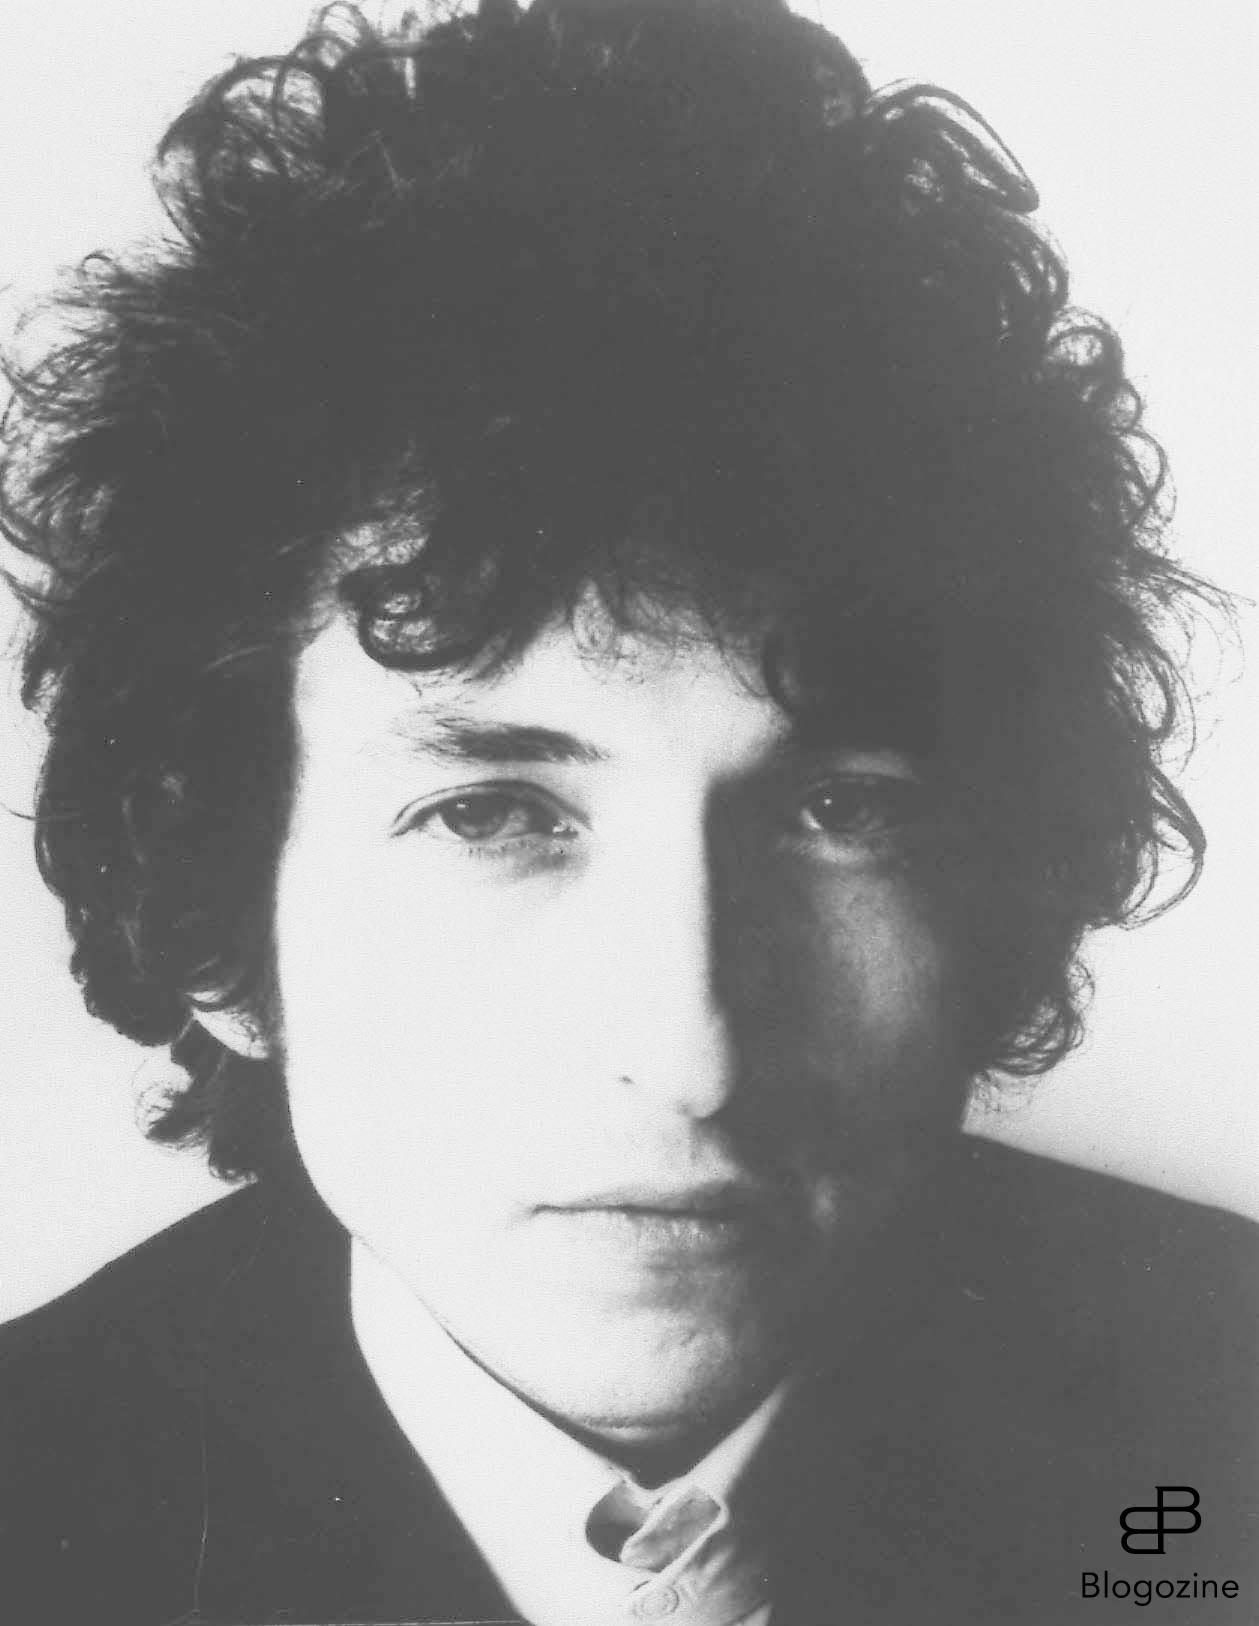 3936615 BOB DYLAN American Singer and Songwriter COMPULSORY CREDIT: Starstock/Photoshot Photo PHPS 148741 01.09.1967 COPYRIGHT STELLA PICTURES